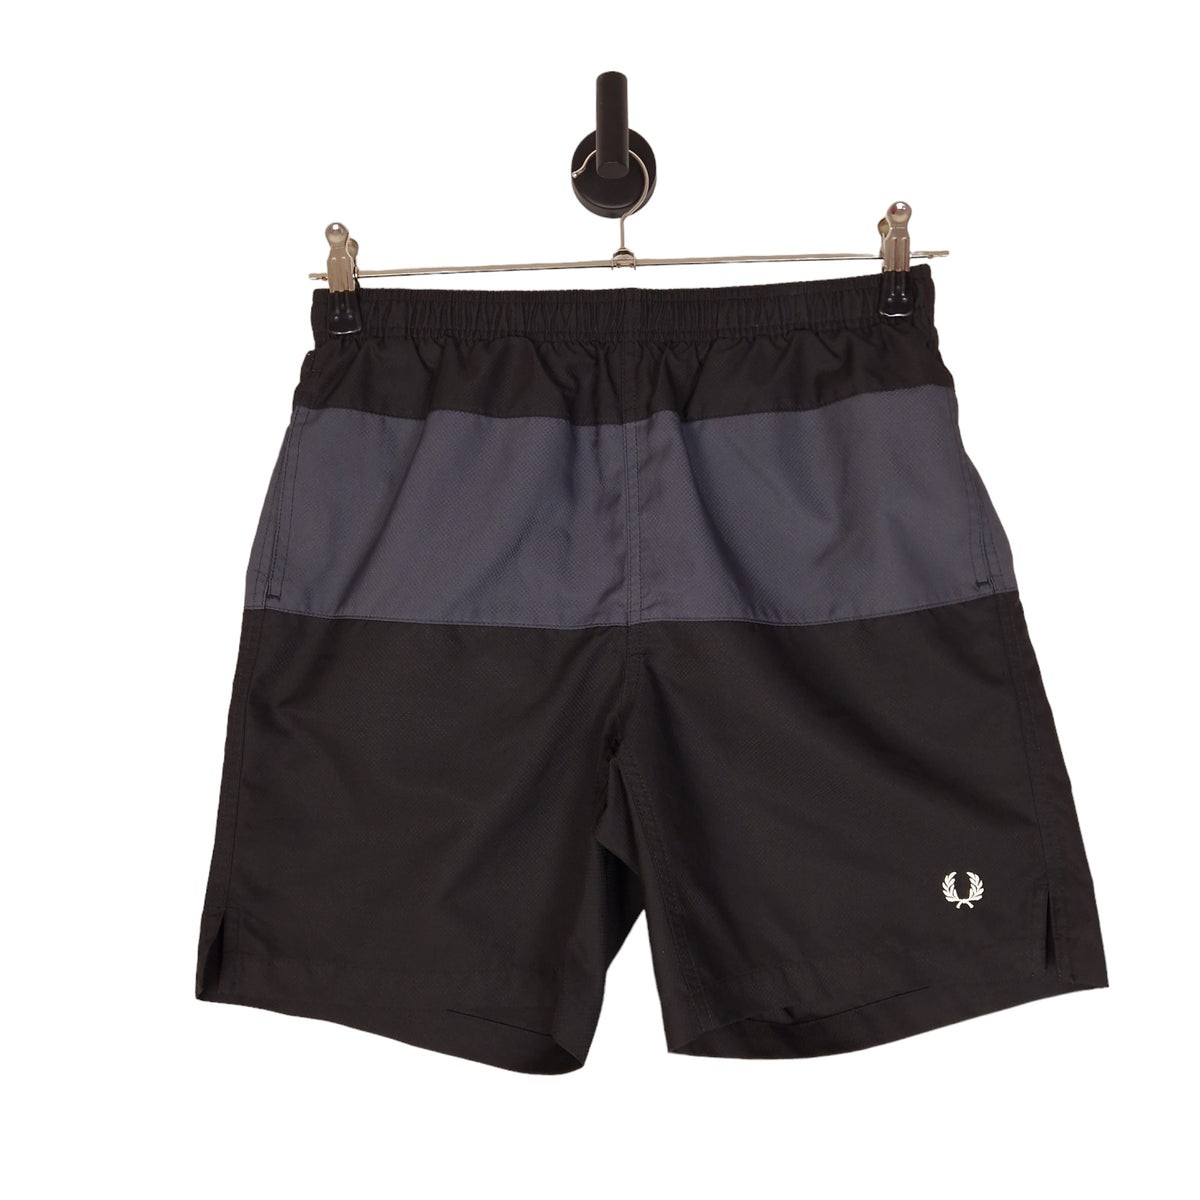 Fred Perry Swim Shorts  - Size Xs